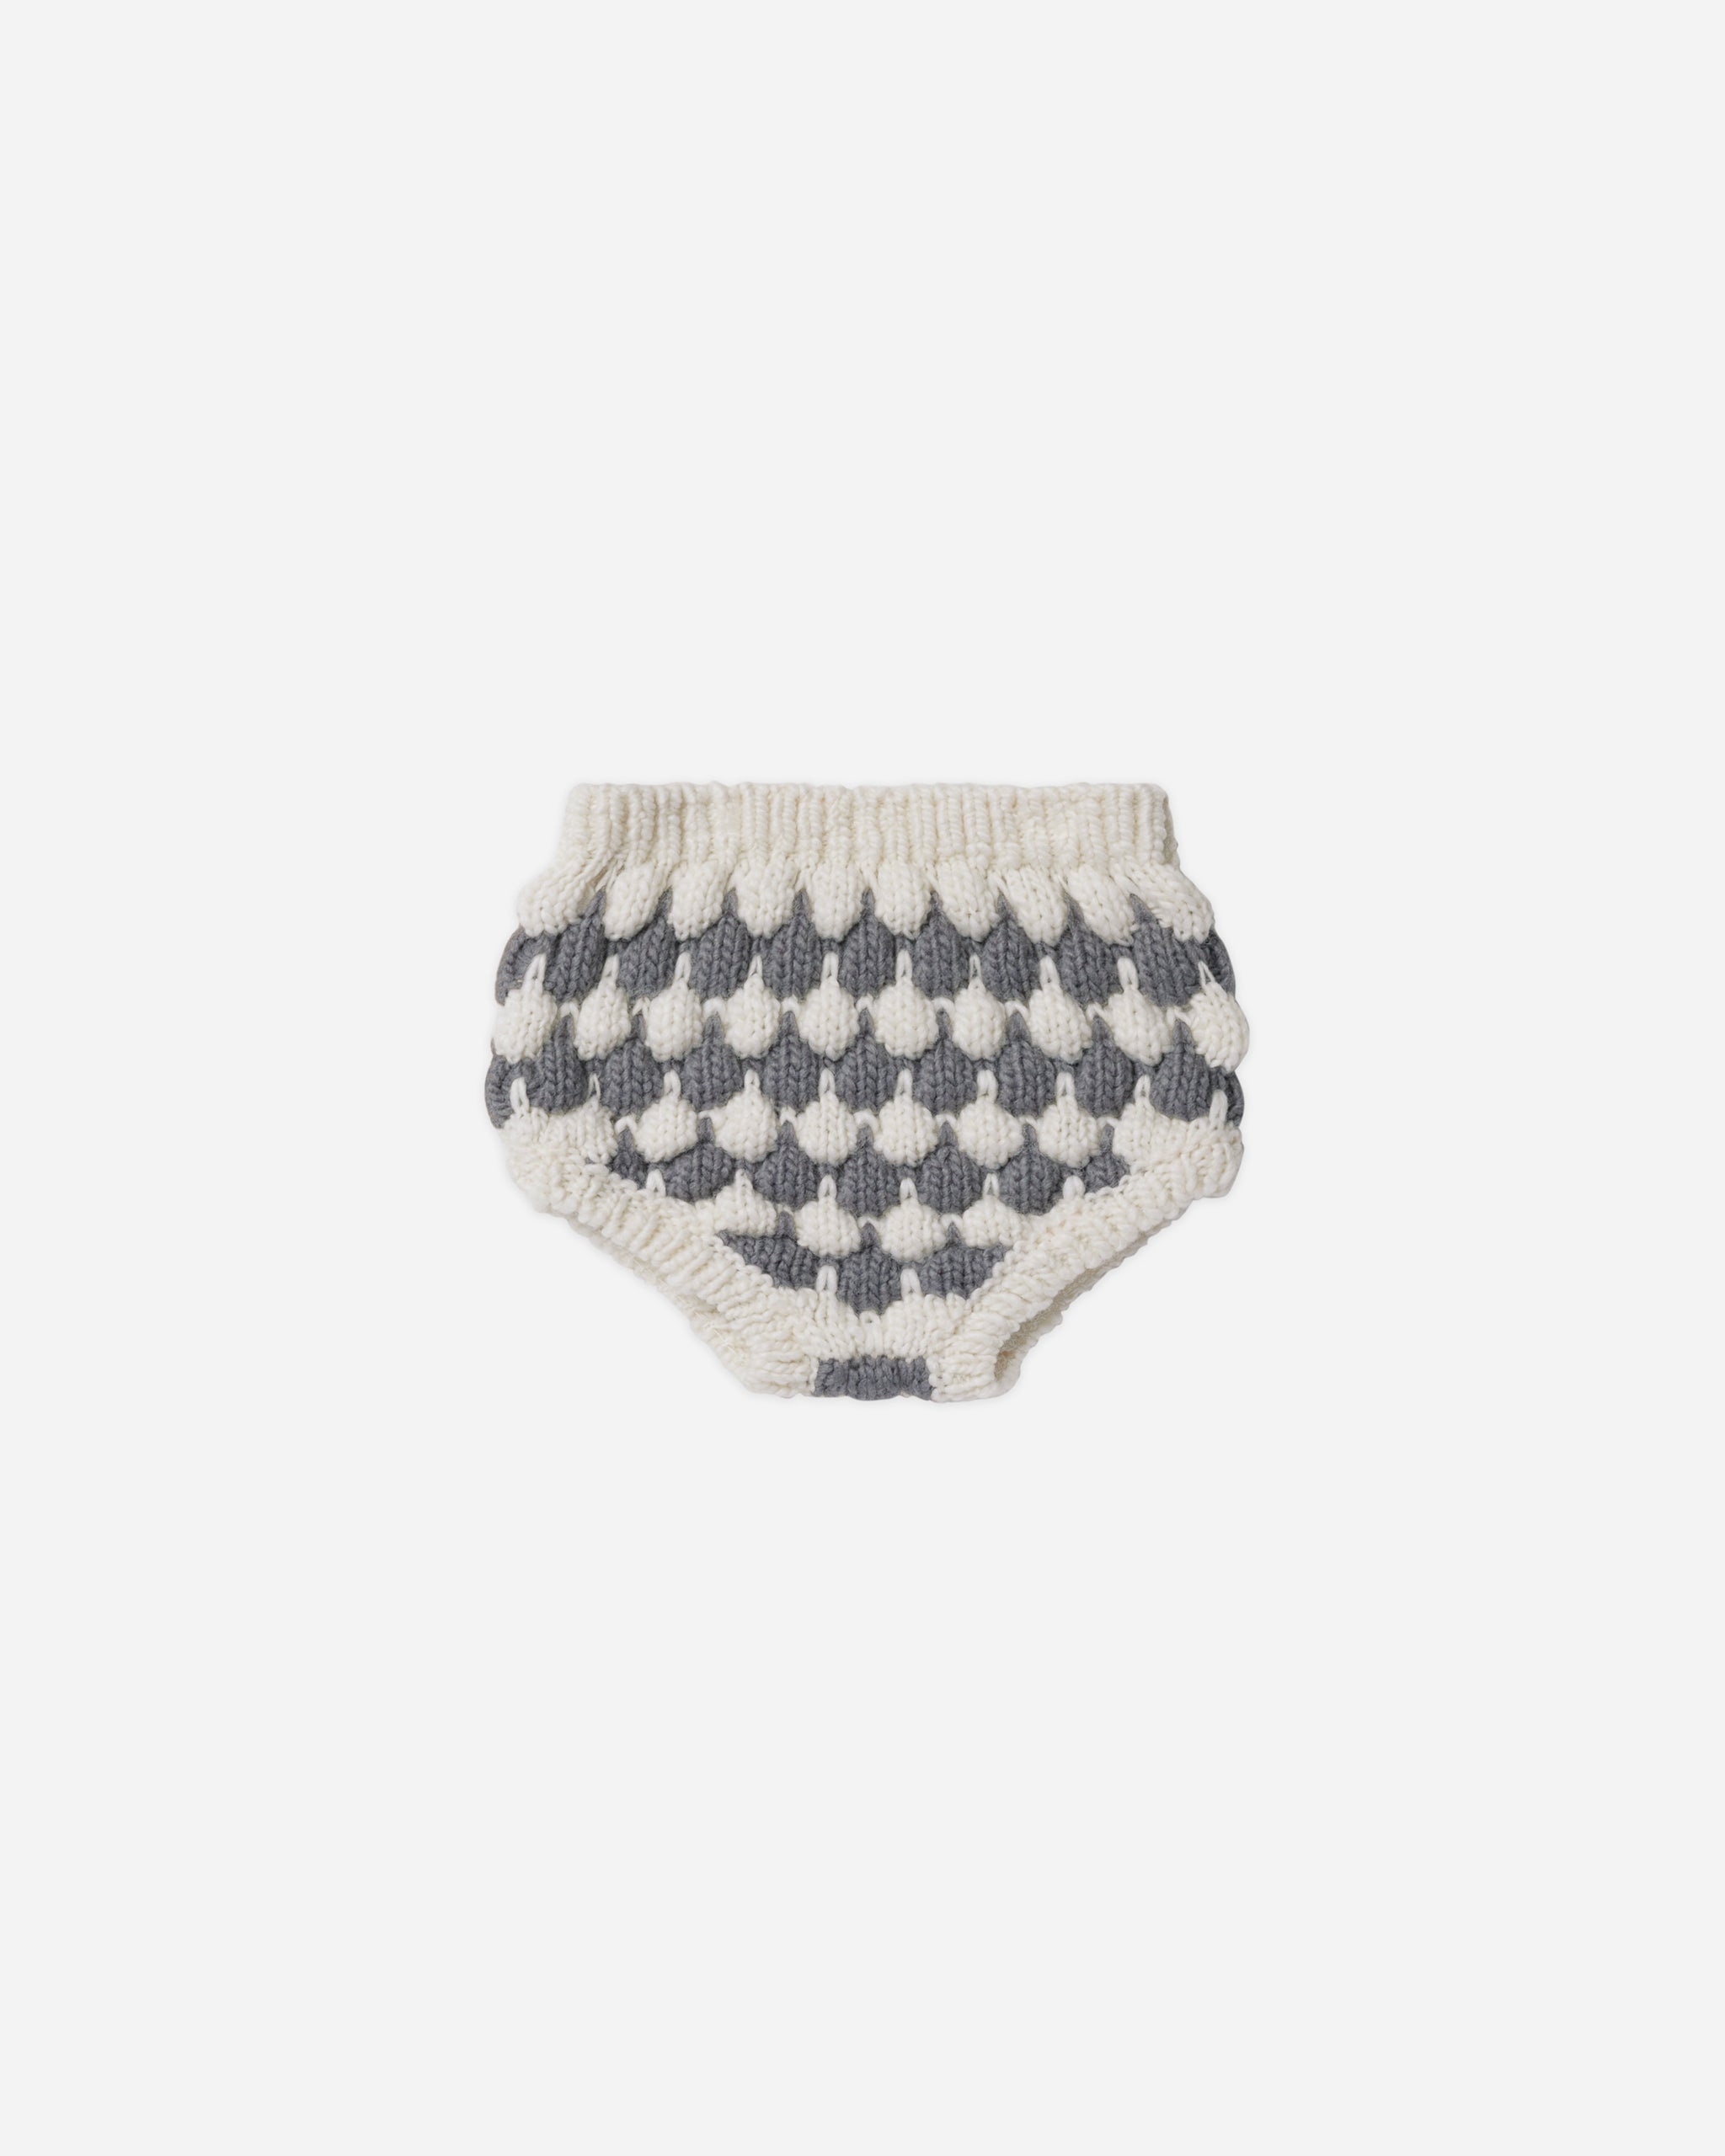 Knit Bloomer || Slate Stripe - Rylee + Cru | Kids Clothes | Trendy Baby Clothes | Modern Infant Outfits |